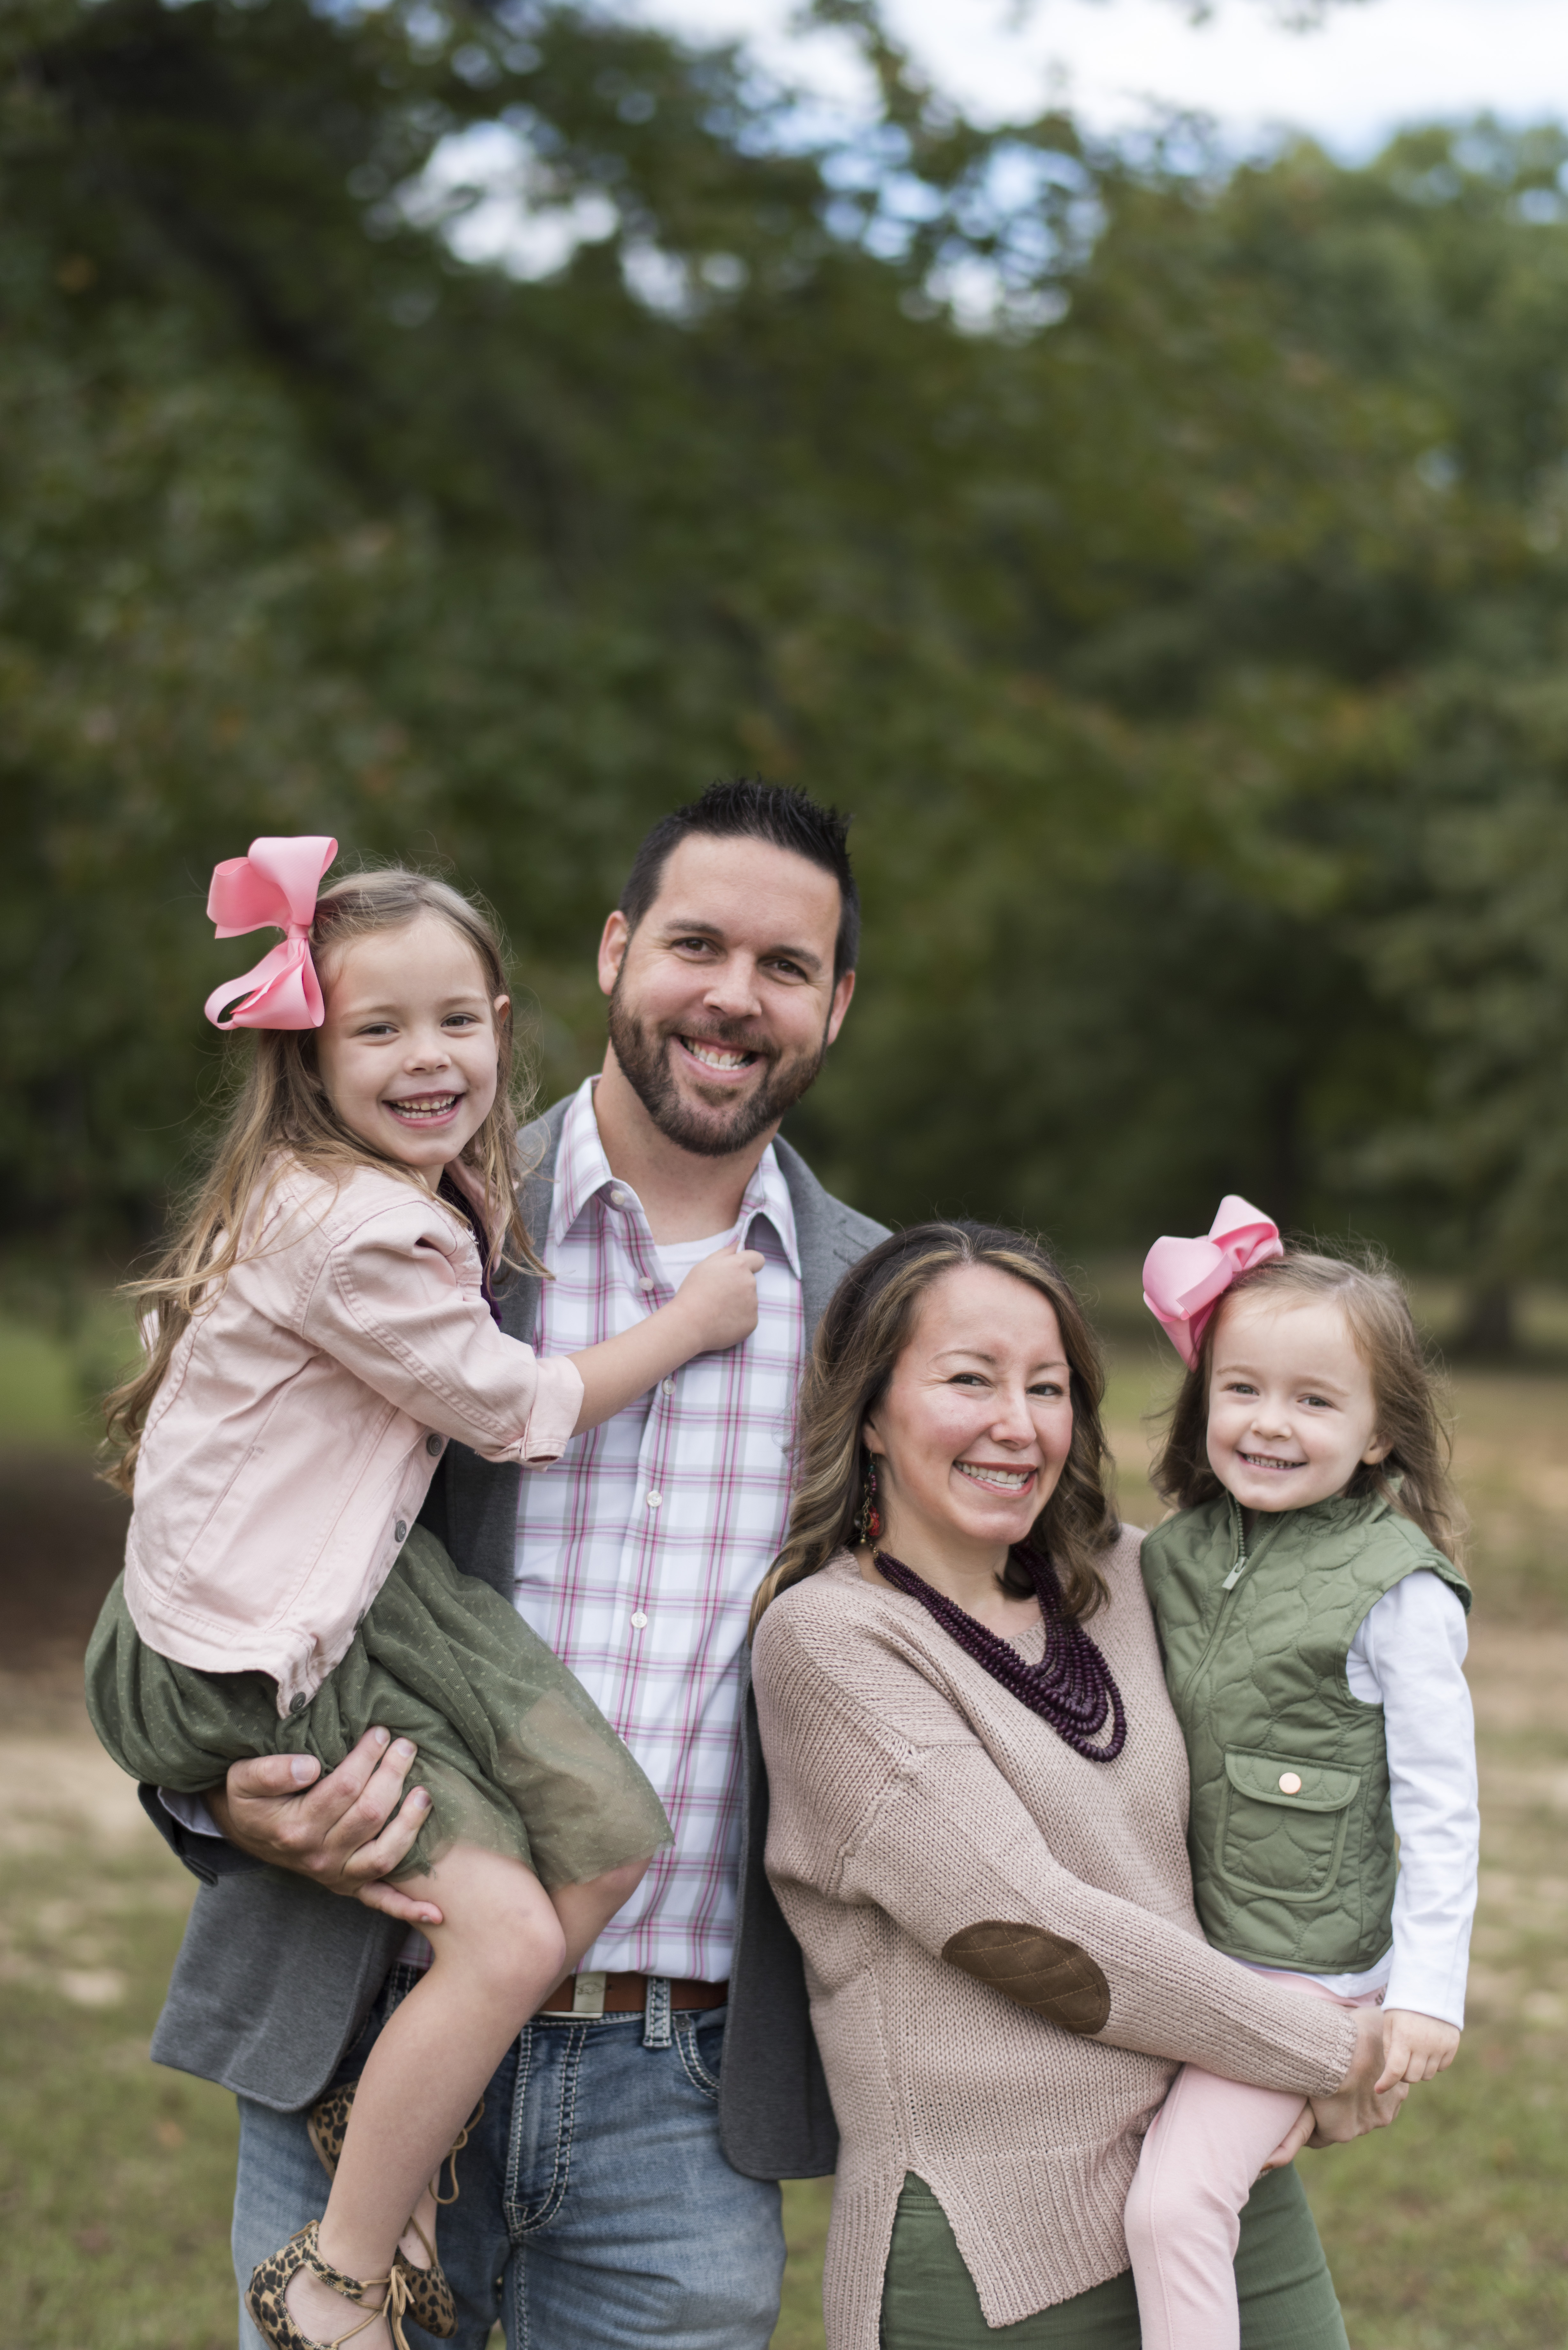 Fall Family Pictures - Outfit Ideas - Olive and Pink - The Gifted Gabber - #familypictures #outfits for family portraits #familyphotos